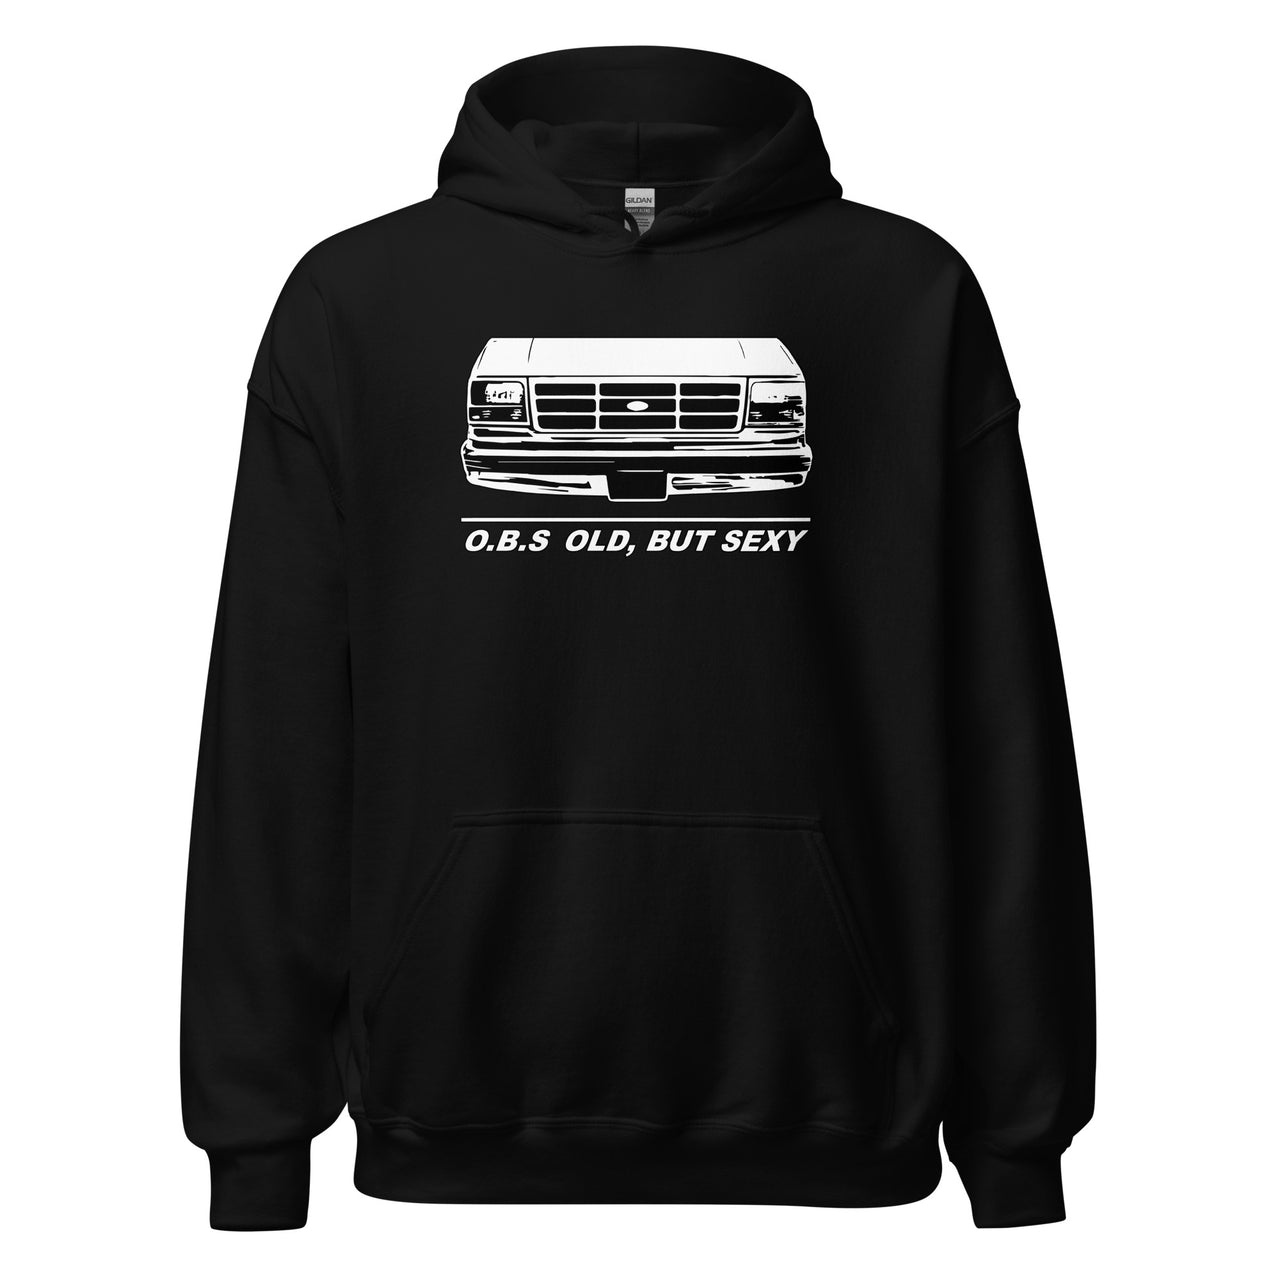 OBS Truck - Old, But Sexy Hoodie in black